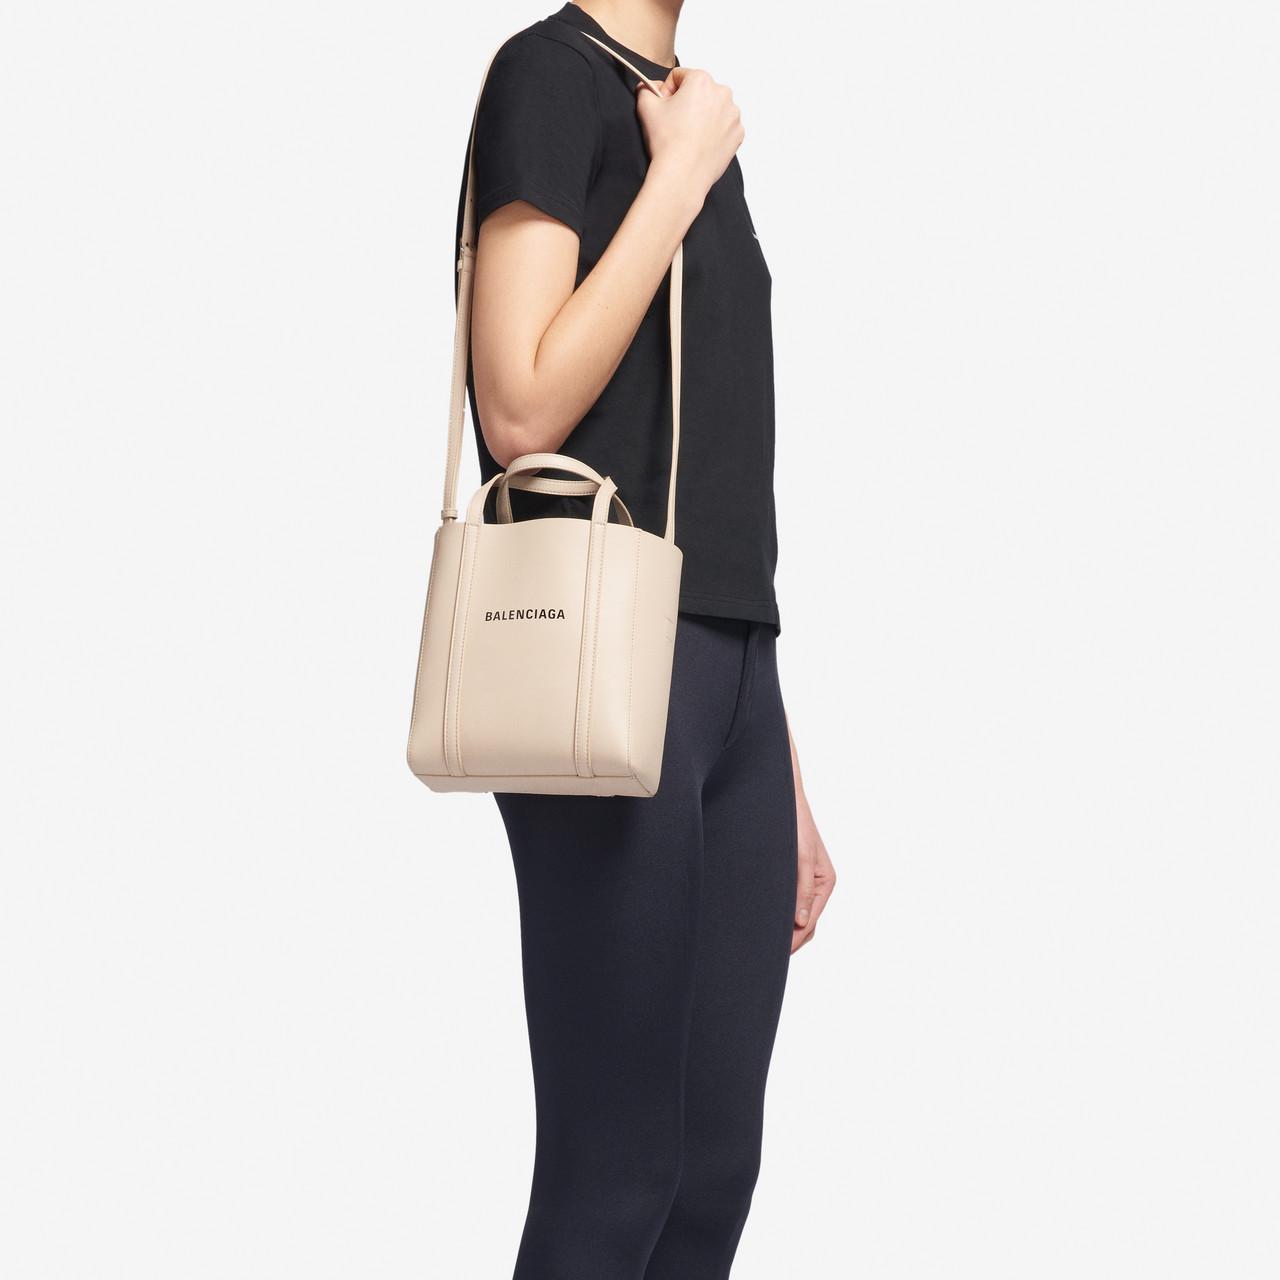 Balenciaga Leather Everyday Xxs Tote Bag in Beige / Black (Natural) - Lyst